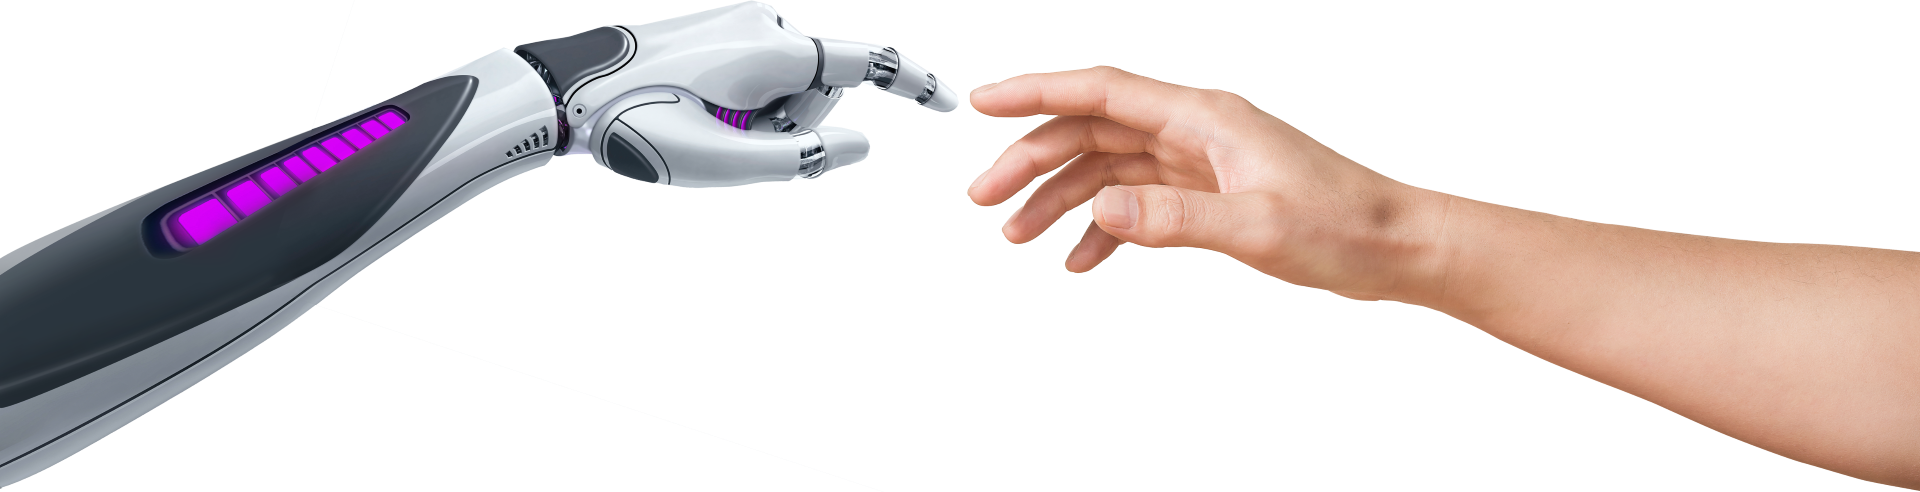 Robotic and human hand touching